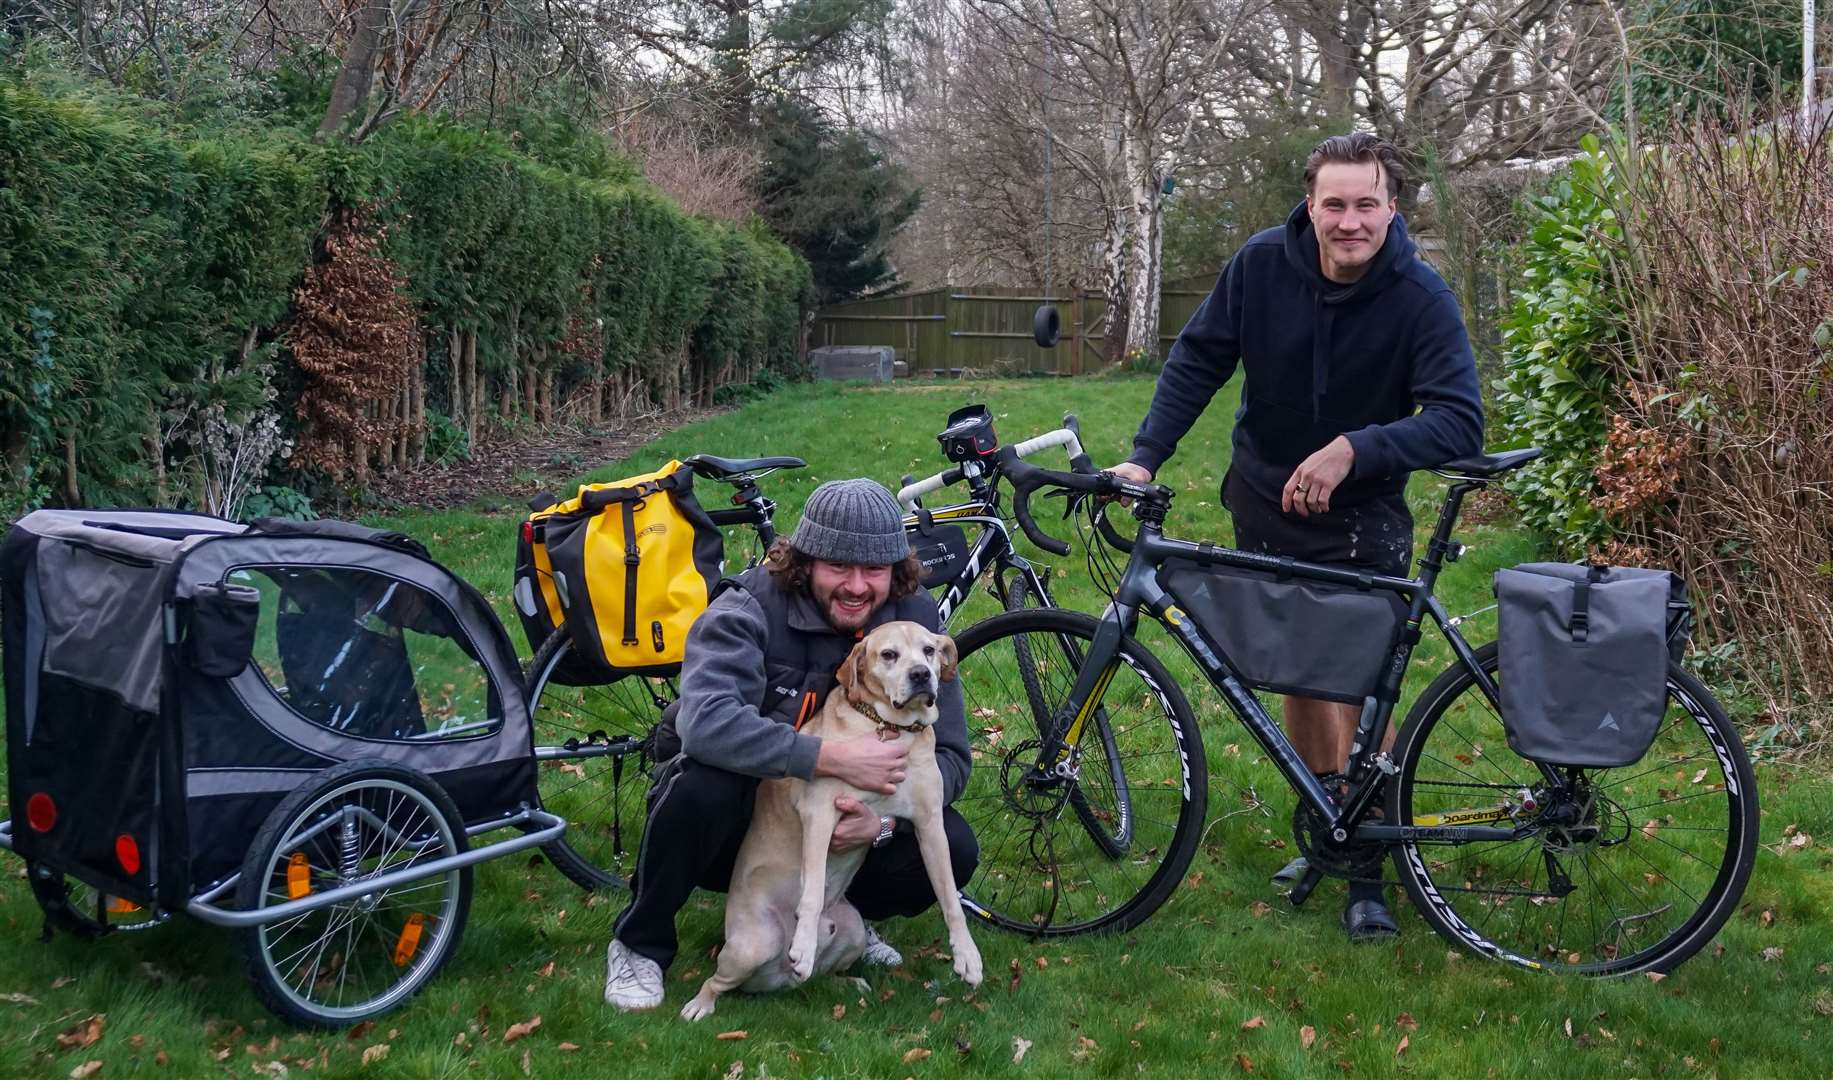 Sean Grobler and Sam Latter are preparing to cycle 1,500km through Europe with Nelson